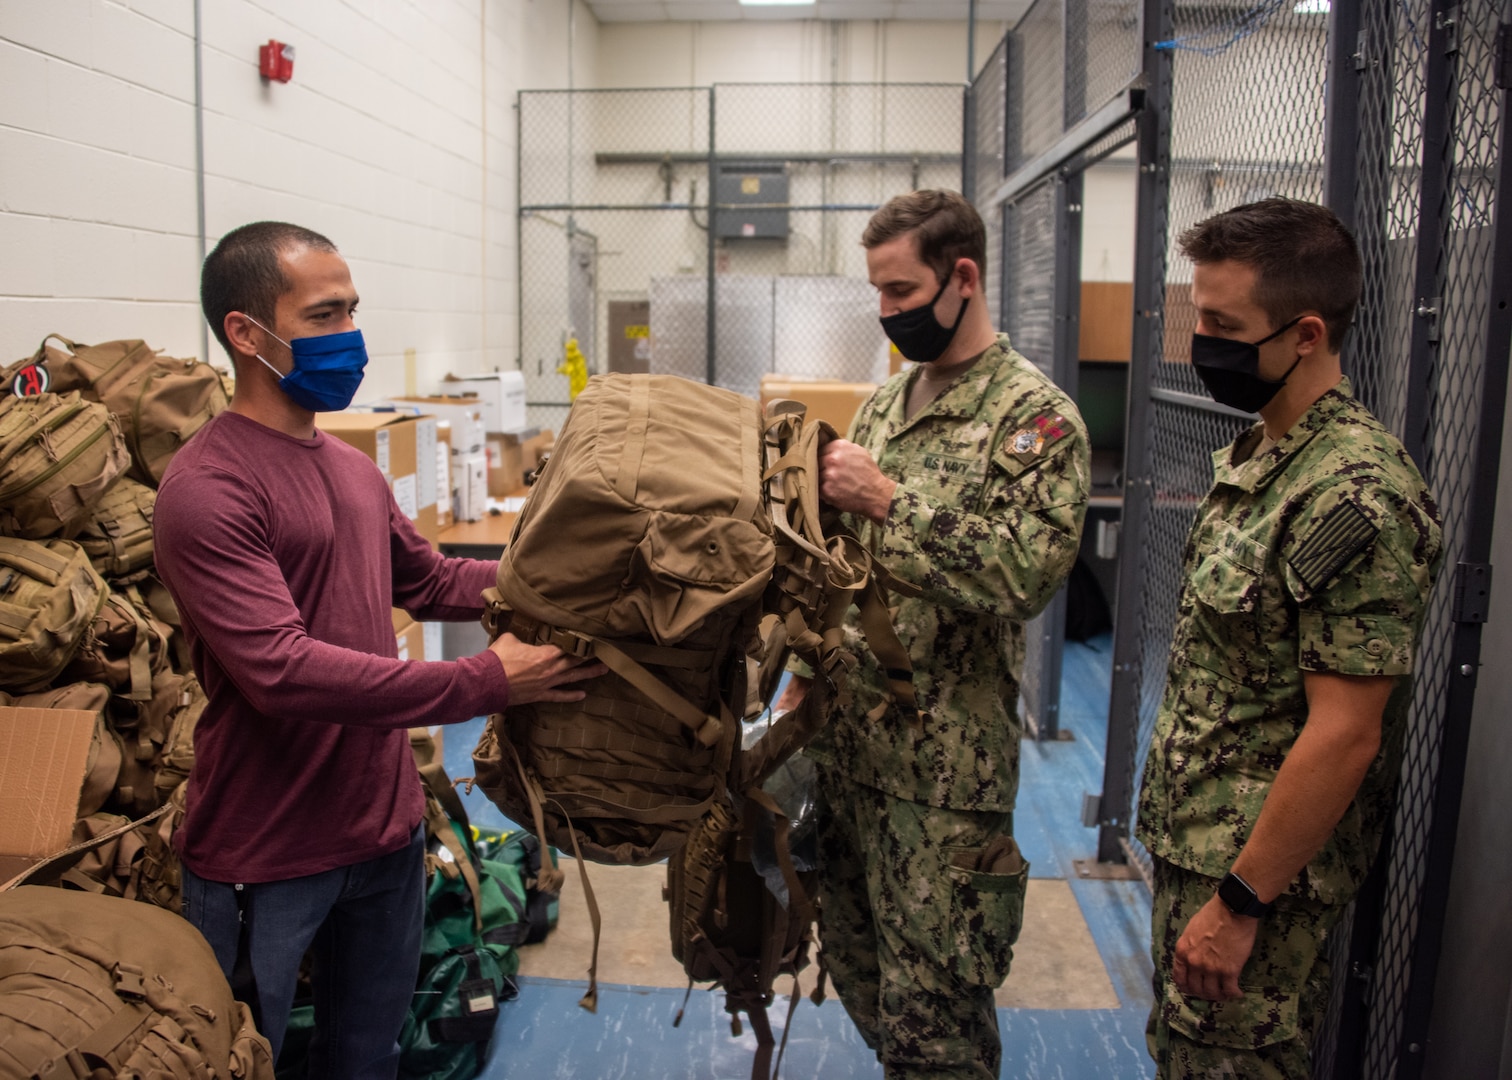 Before the egress testing, Sailors were issued gear to simulate full load out conditions of the Landing Craft Air Cushion. Pictured, Carlos Gonzalez Montanez, issues gear to Hospital Corpsman 1st Class and Hospital Corpsman 3rd Class Kevin Boyaval.